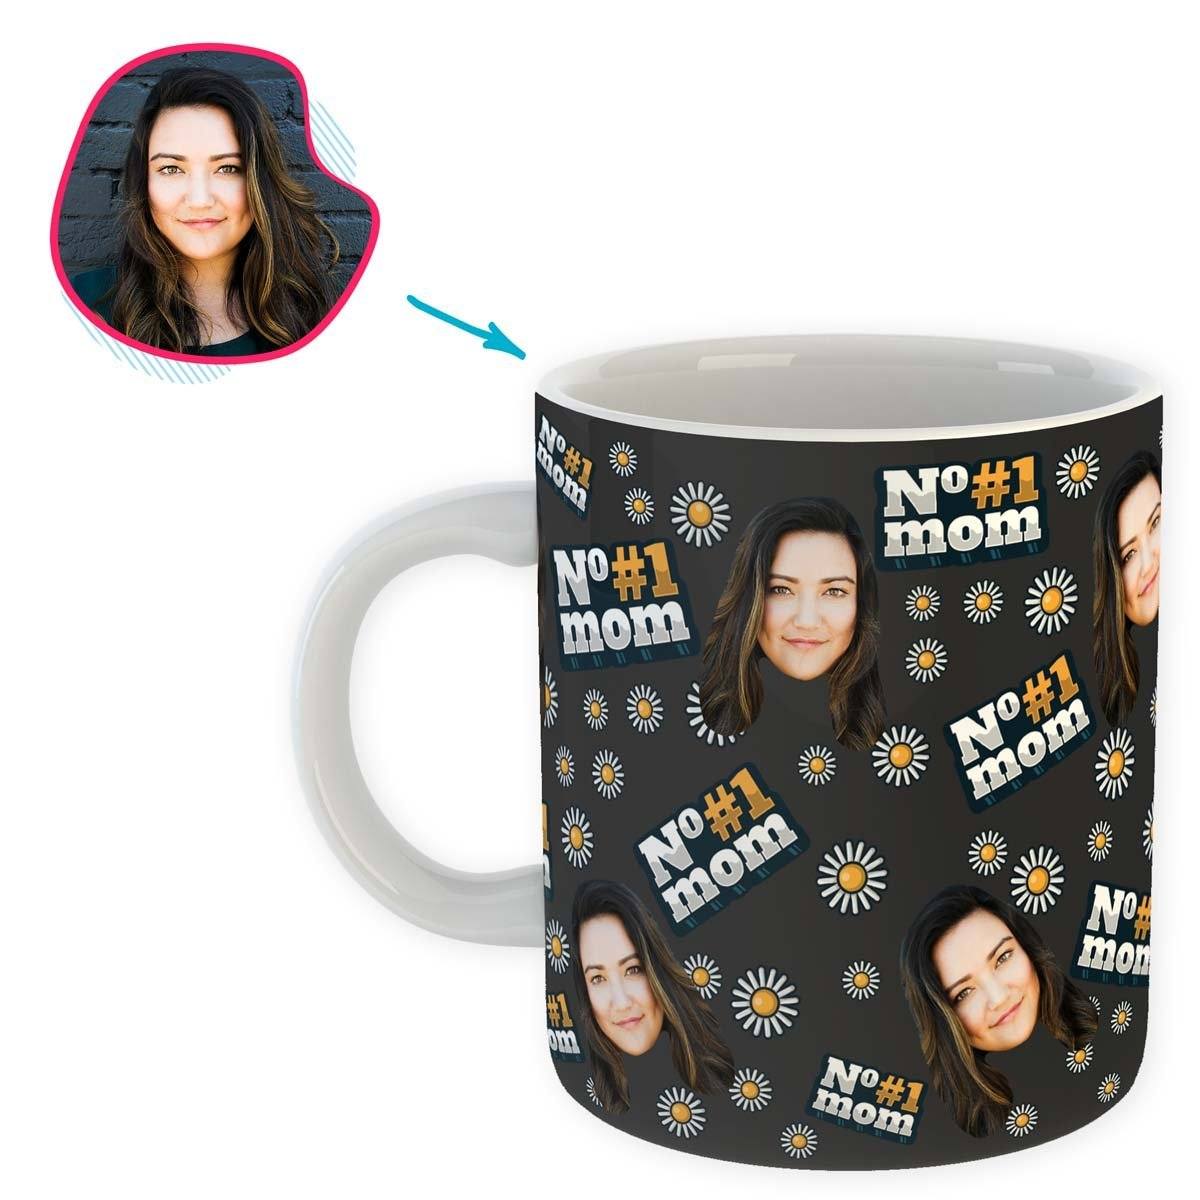 dark #1 Mom mug personalized with photo of face printed on it